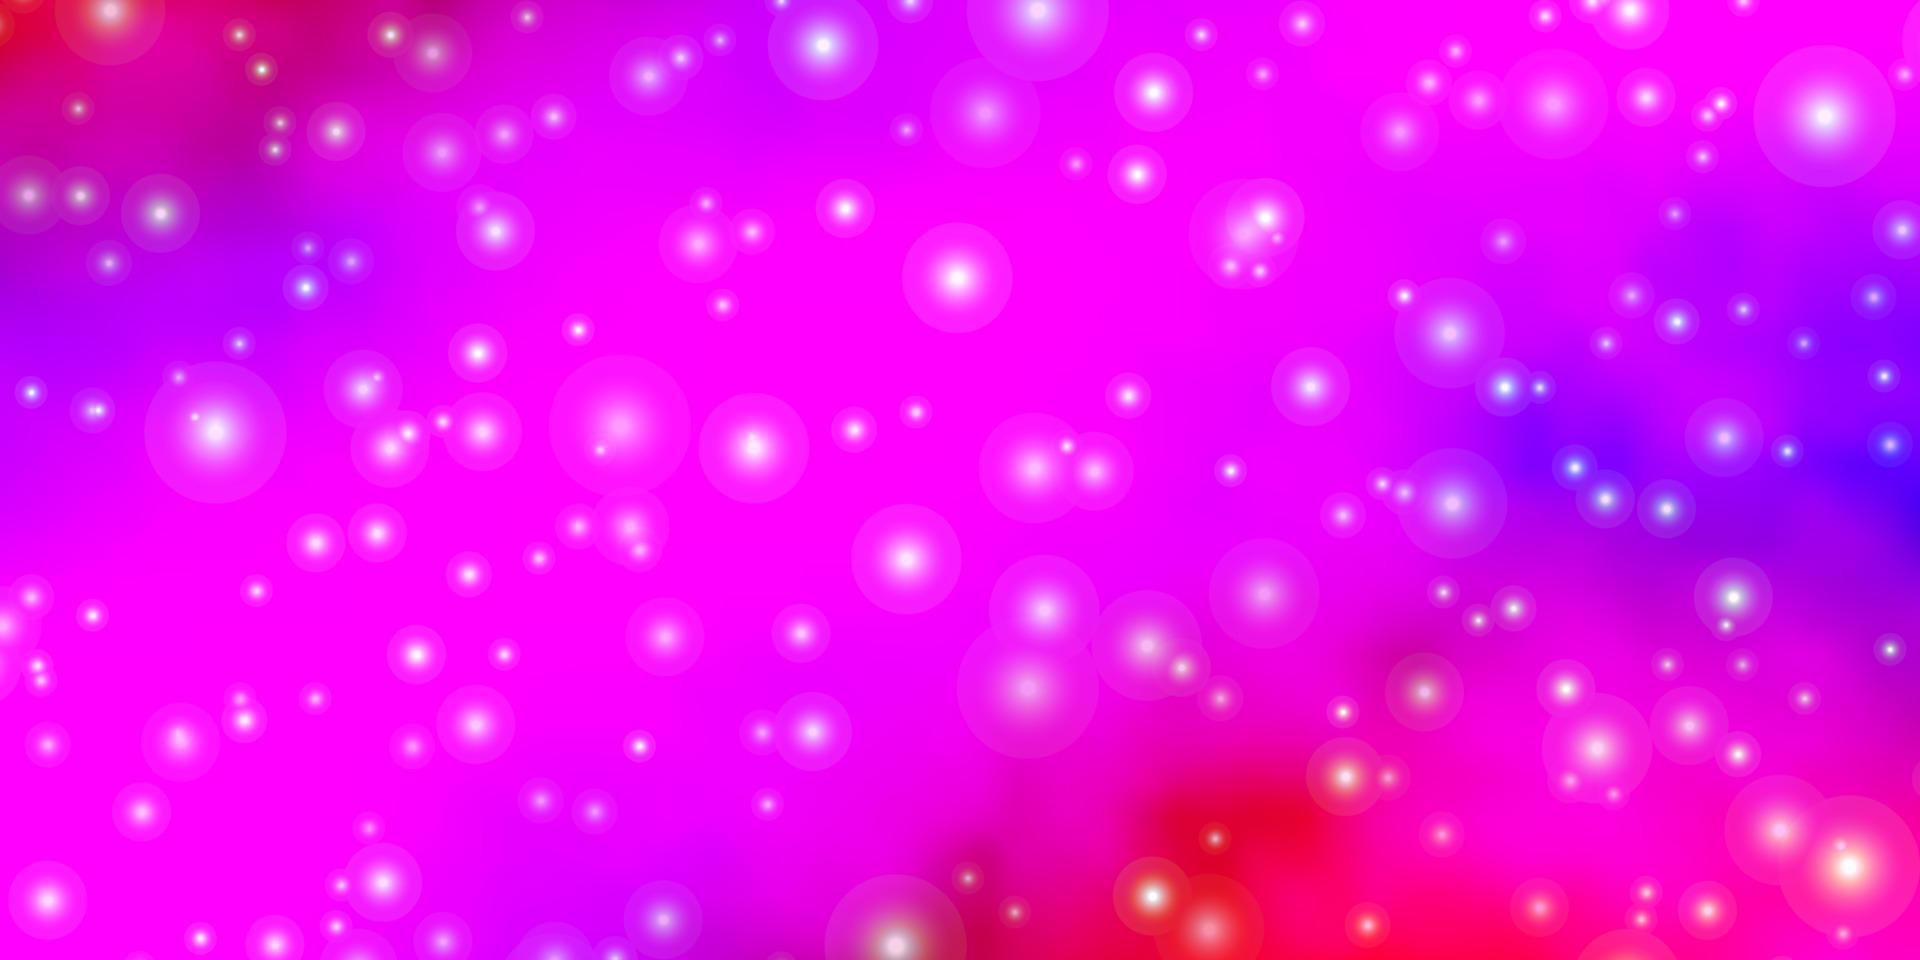 Light Pink, Red vector background with colorful stars.